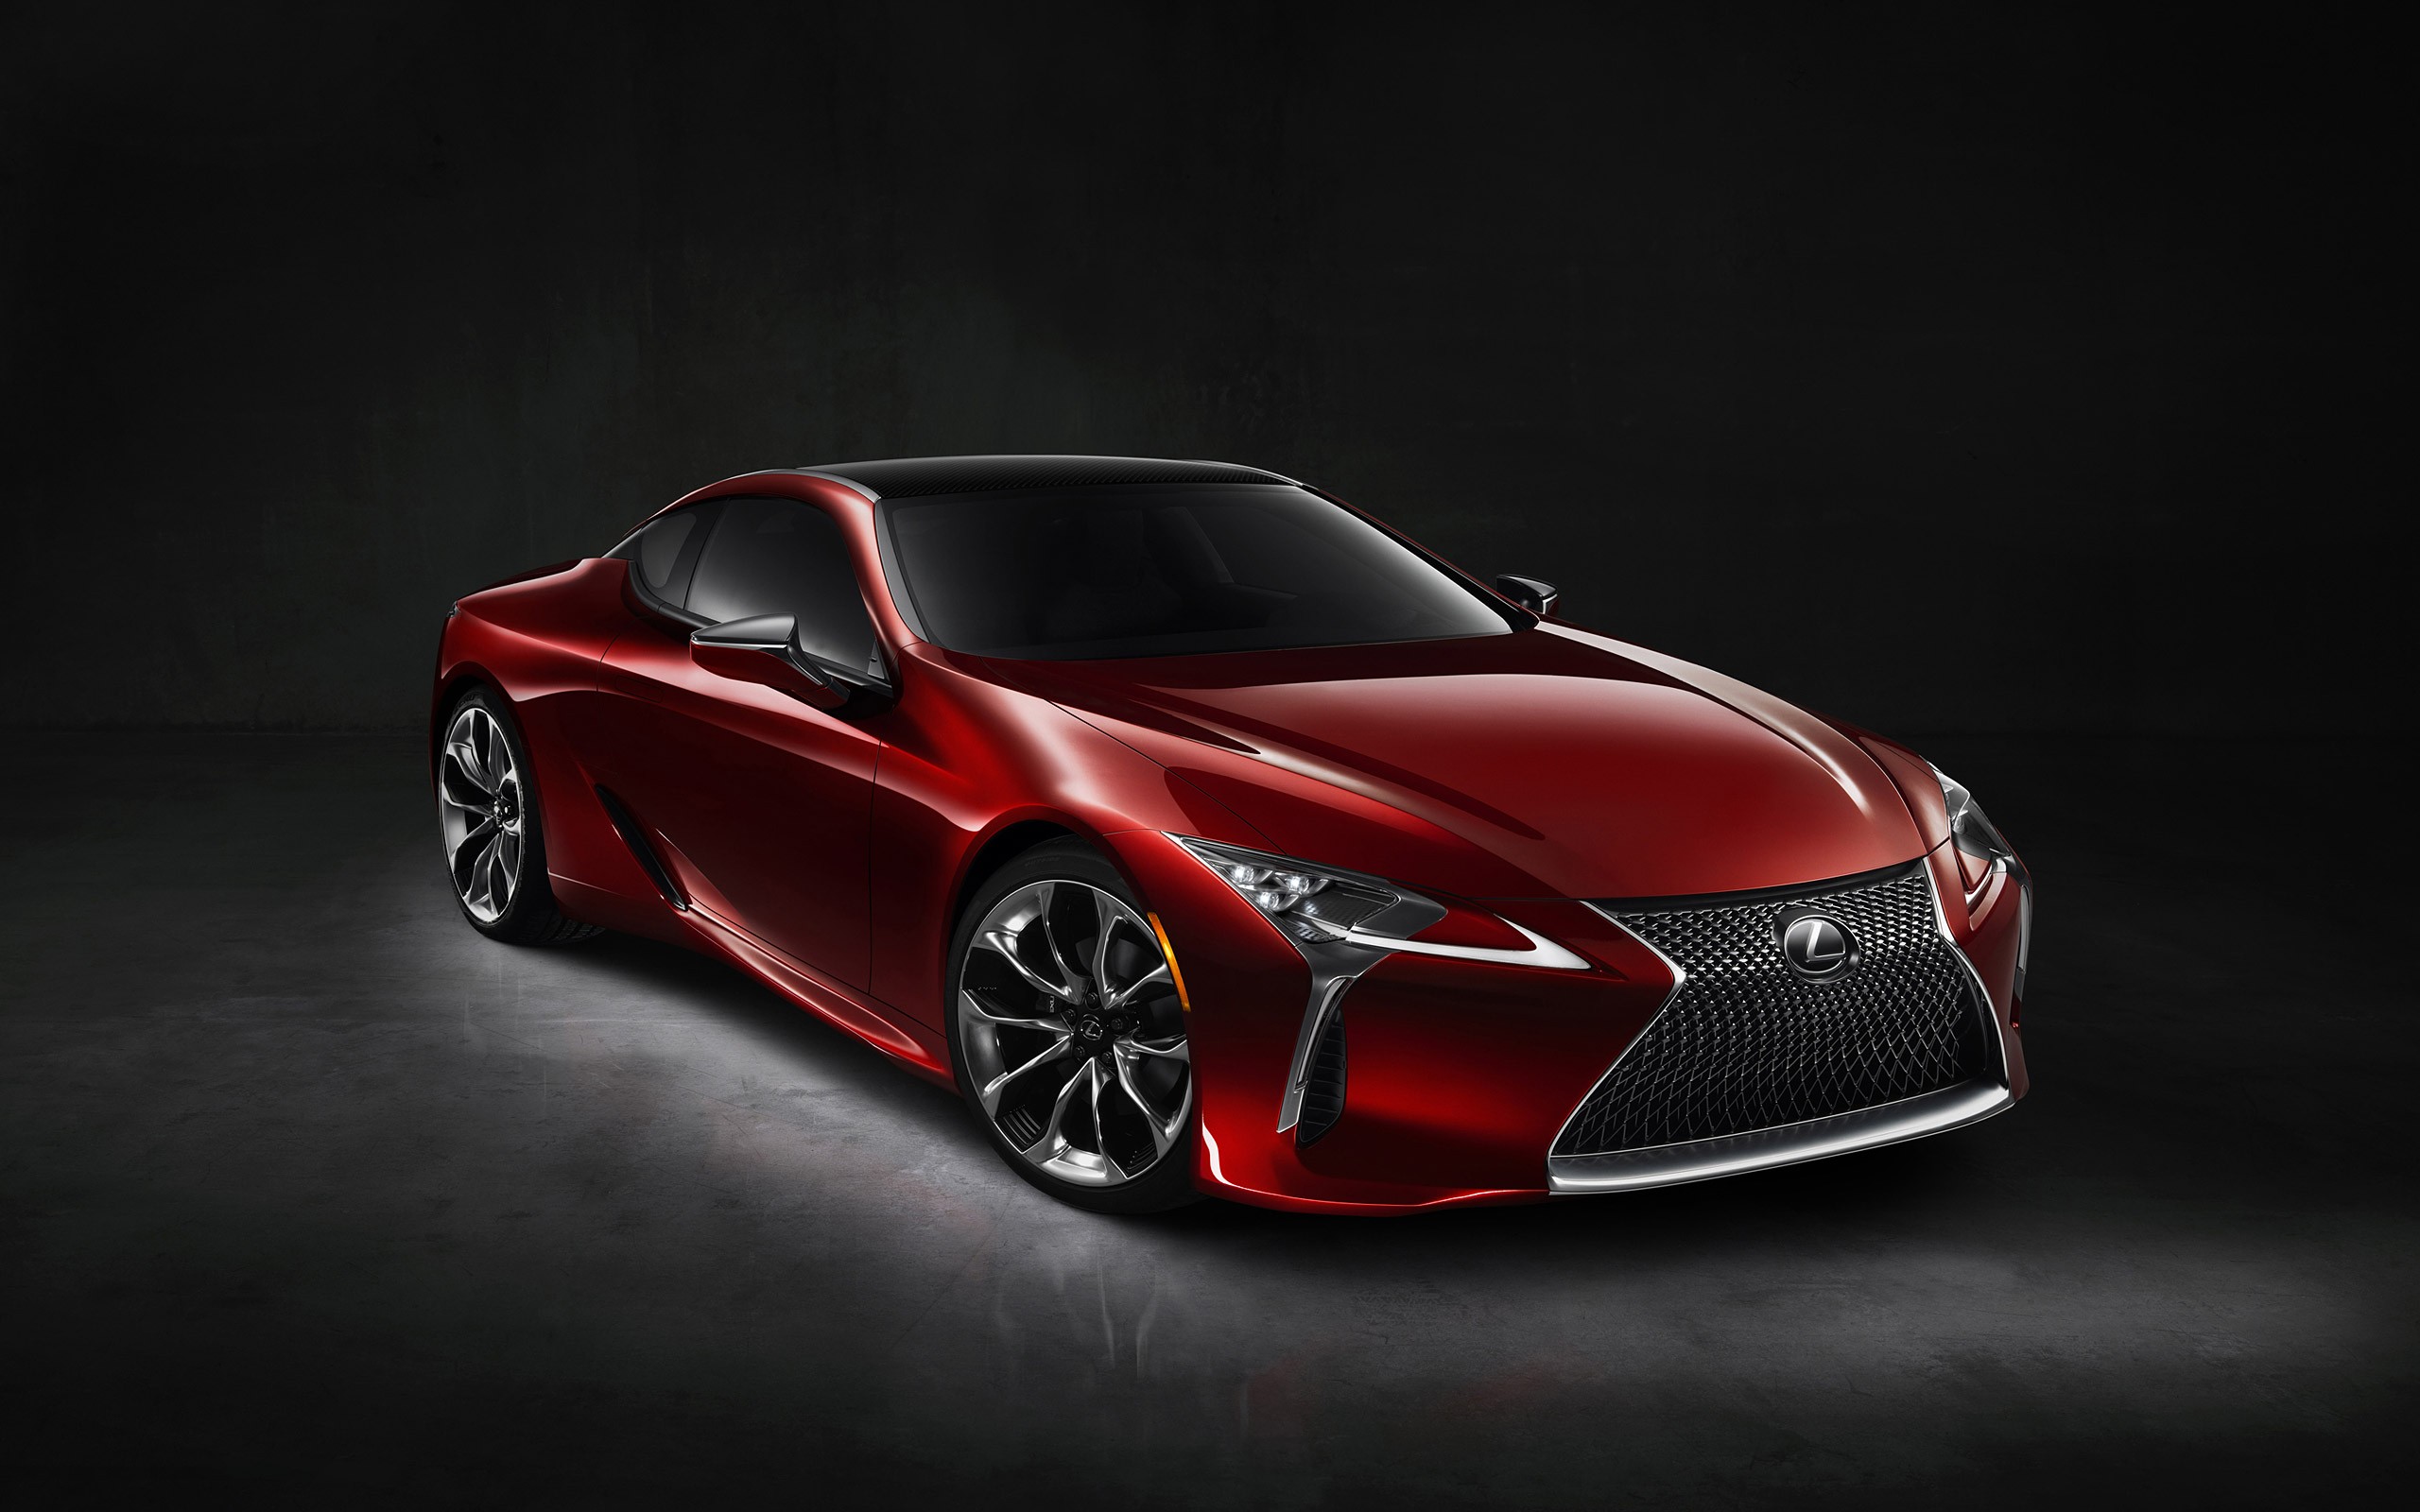 General 2560x1600 Lexus LC-500 simple background car Lexus vehicle red cars Japanese cars